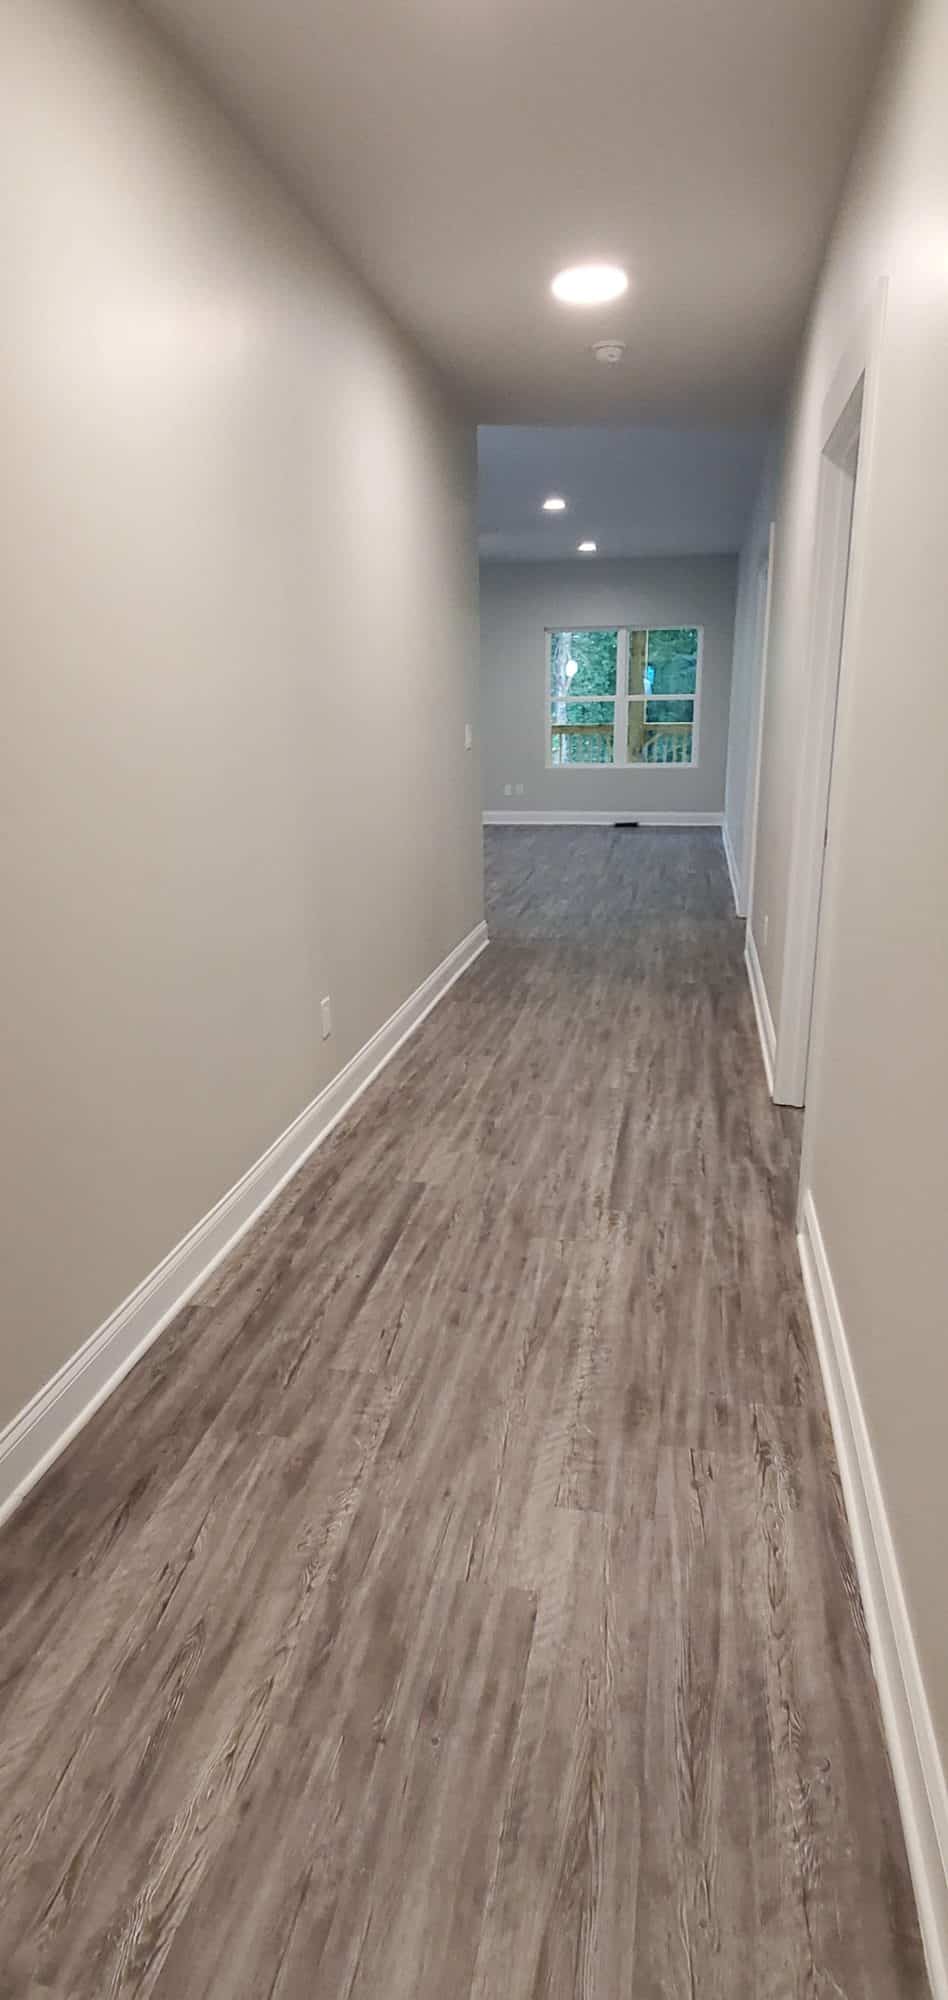 raleigh off campus apartments marcom st off campus apartments near nc state university hallway plank wood flooring